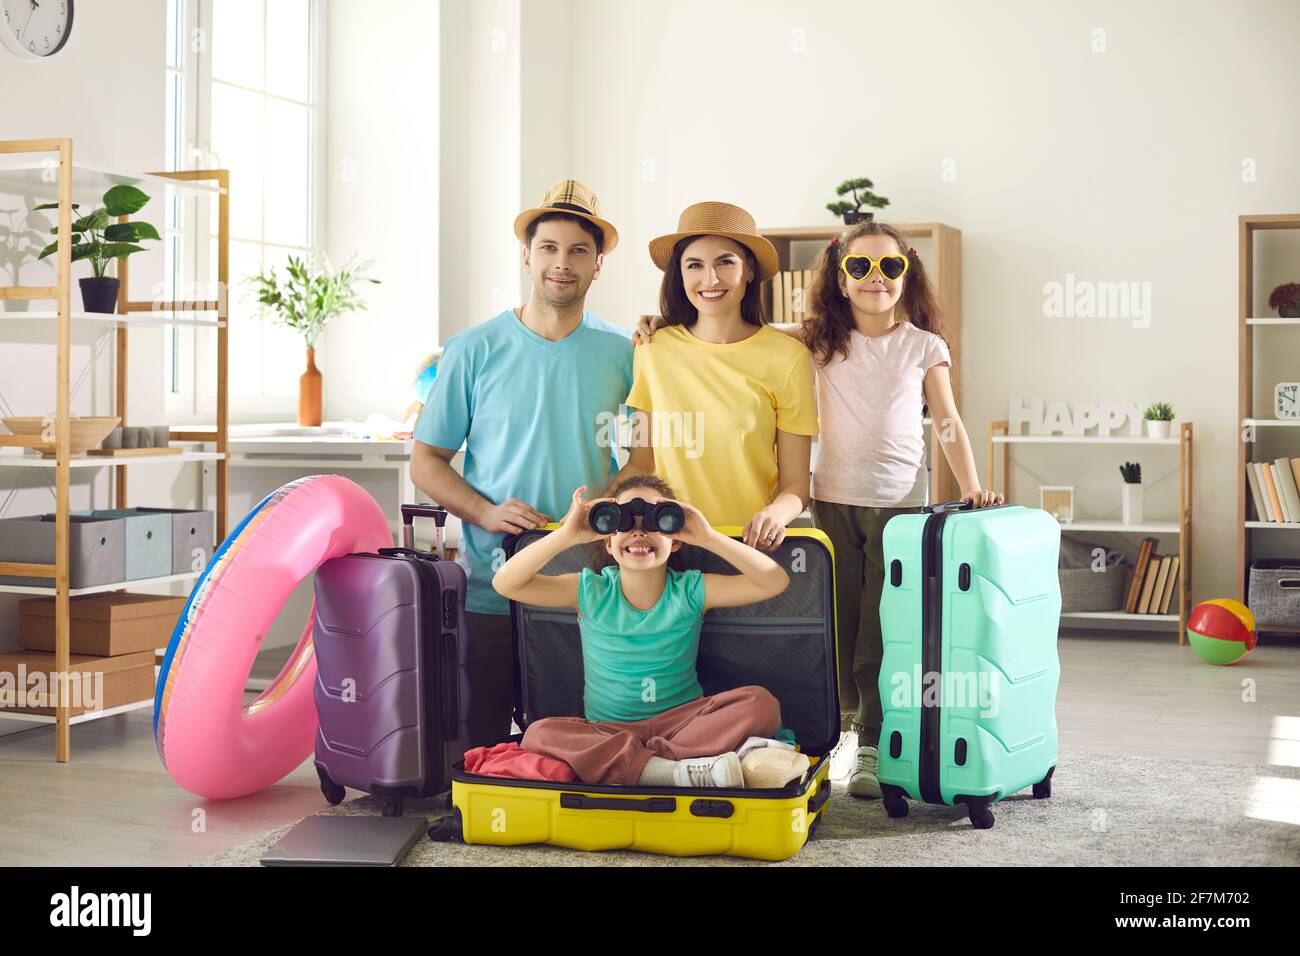 Portrait of happy young family with suitcases ready to go on summer holiday trip Stock Photo